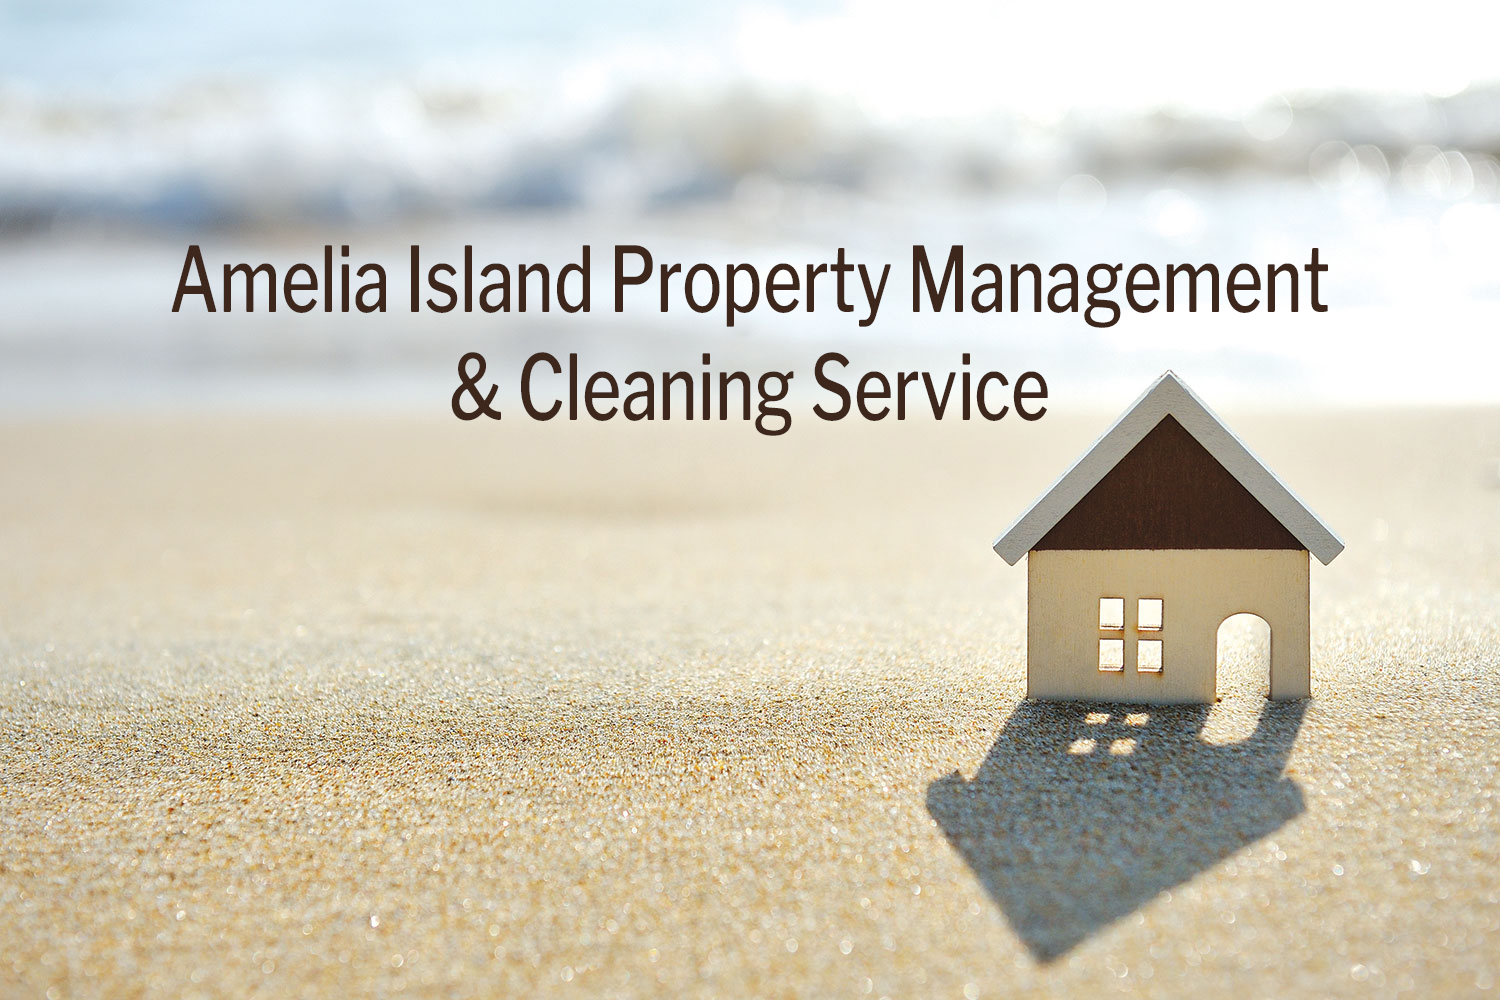 Amelia Island Property Management & Cleaning Service